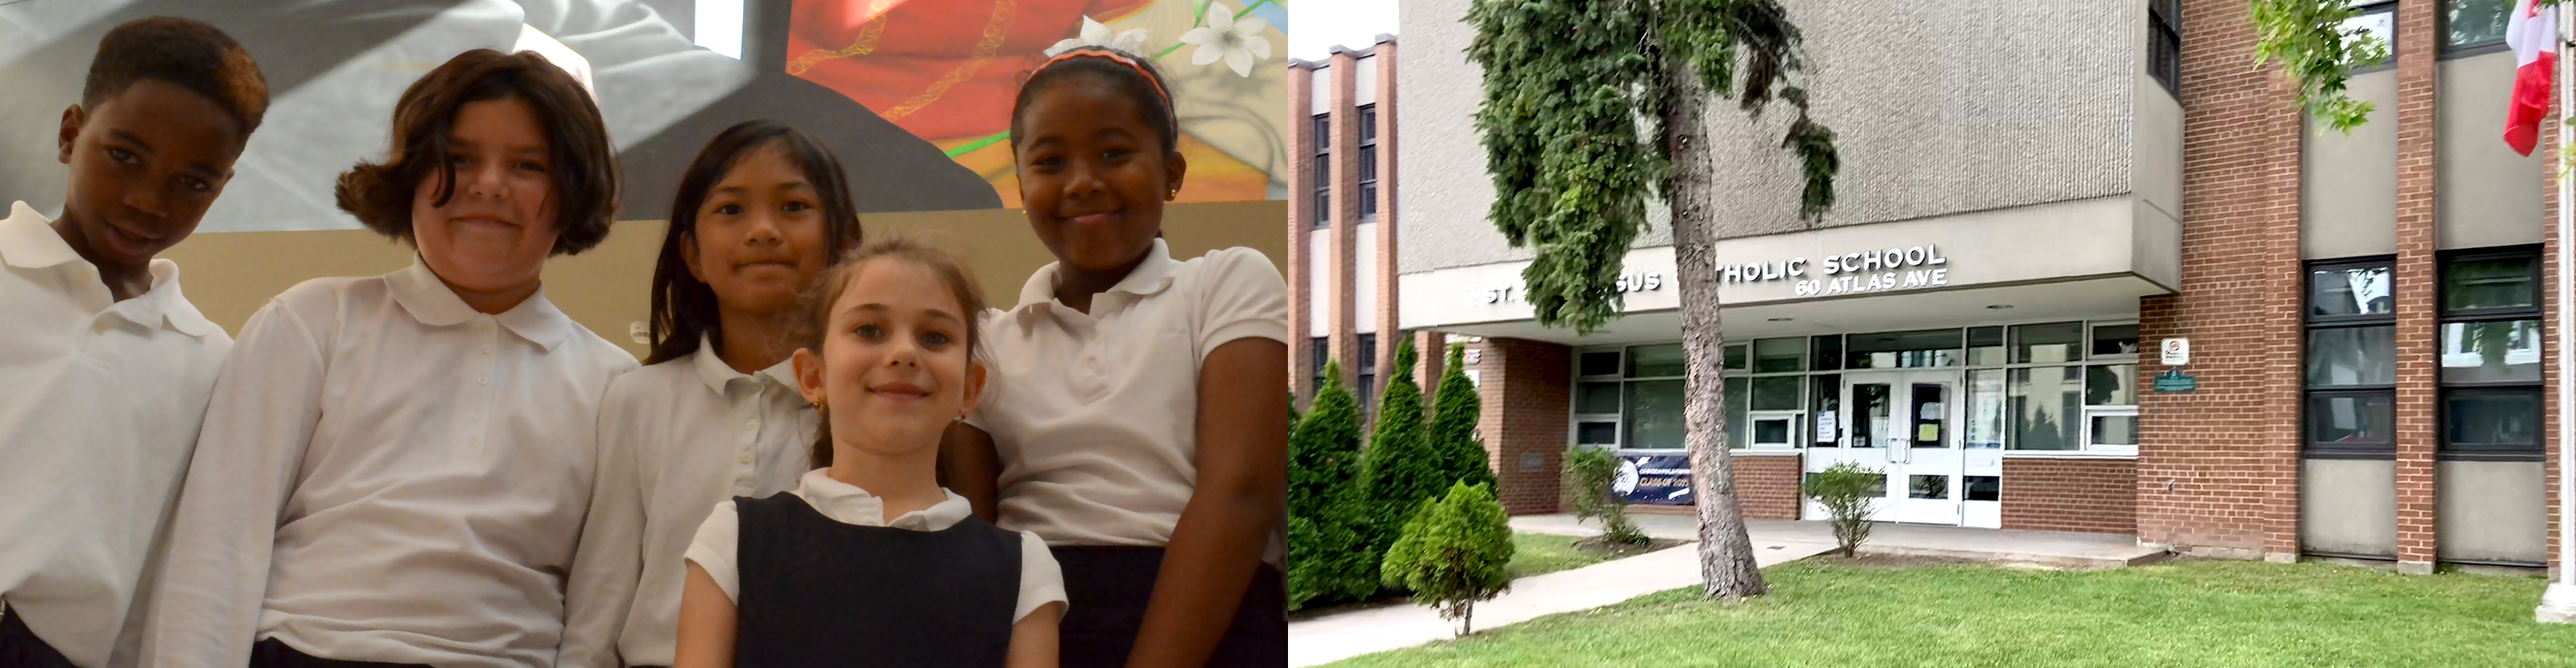 Left, a group of elementary students in white and navy school uniform. Right, the front of the St. Alphonsus Catholic School building.